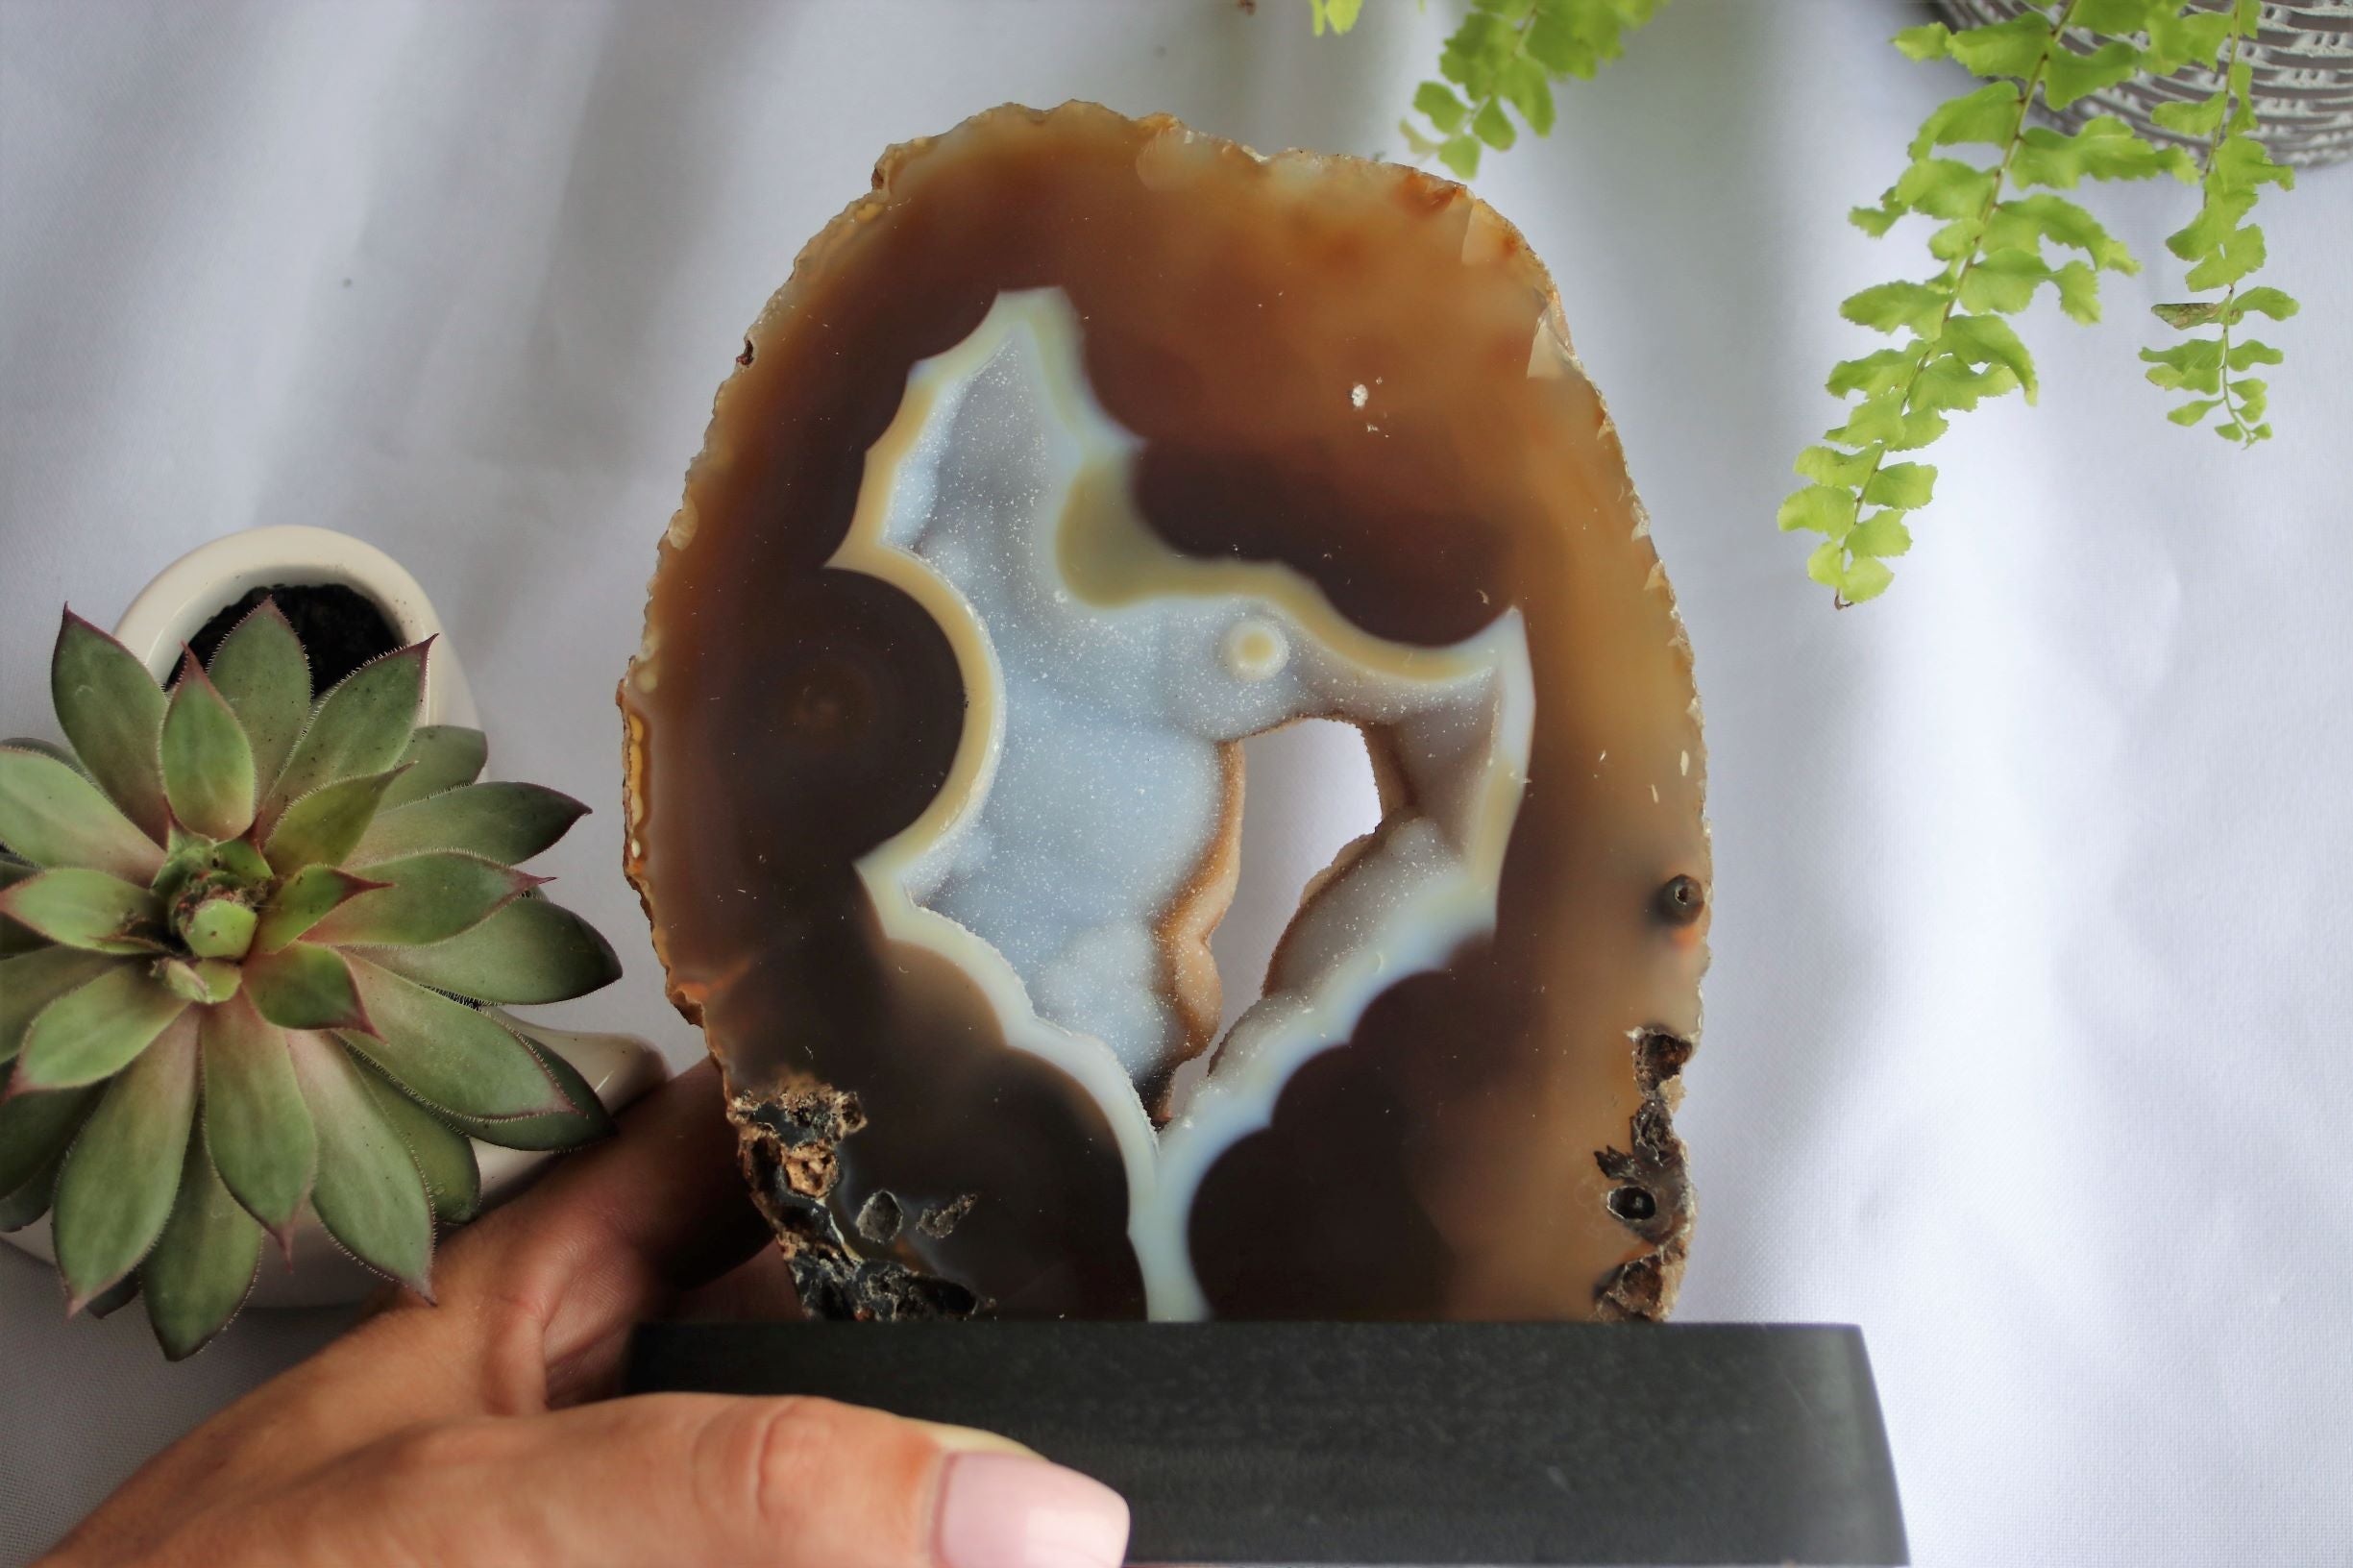 Agate Geode on Stand